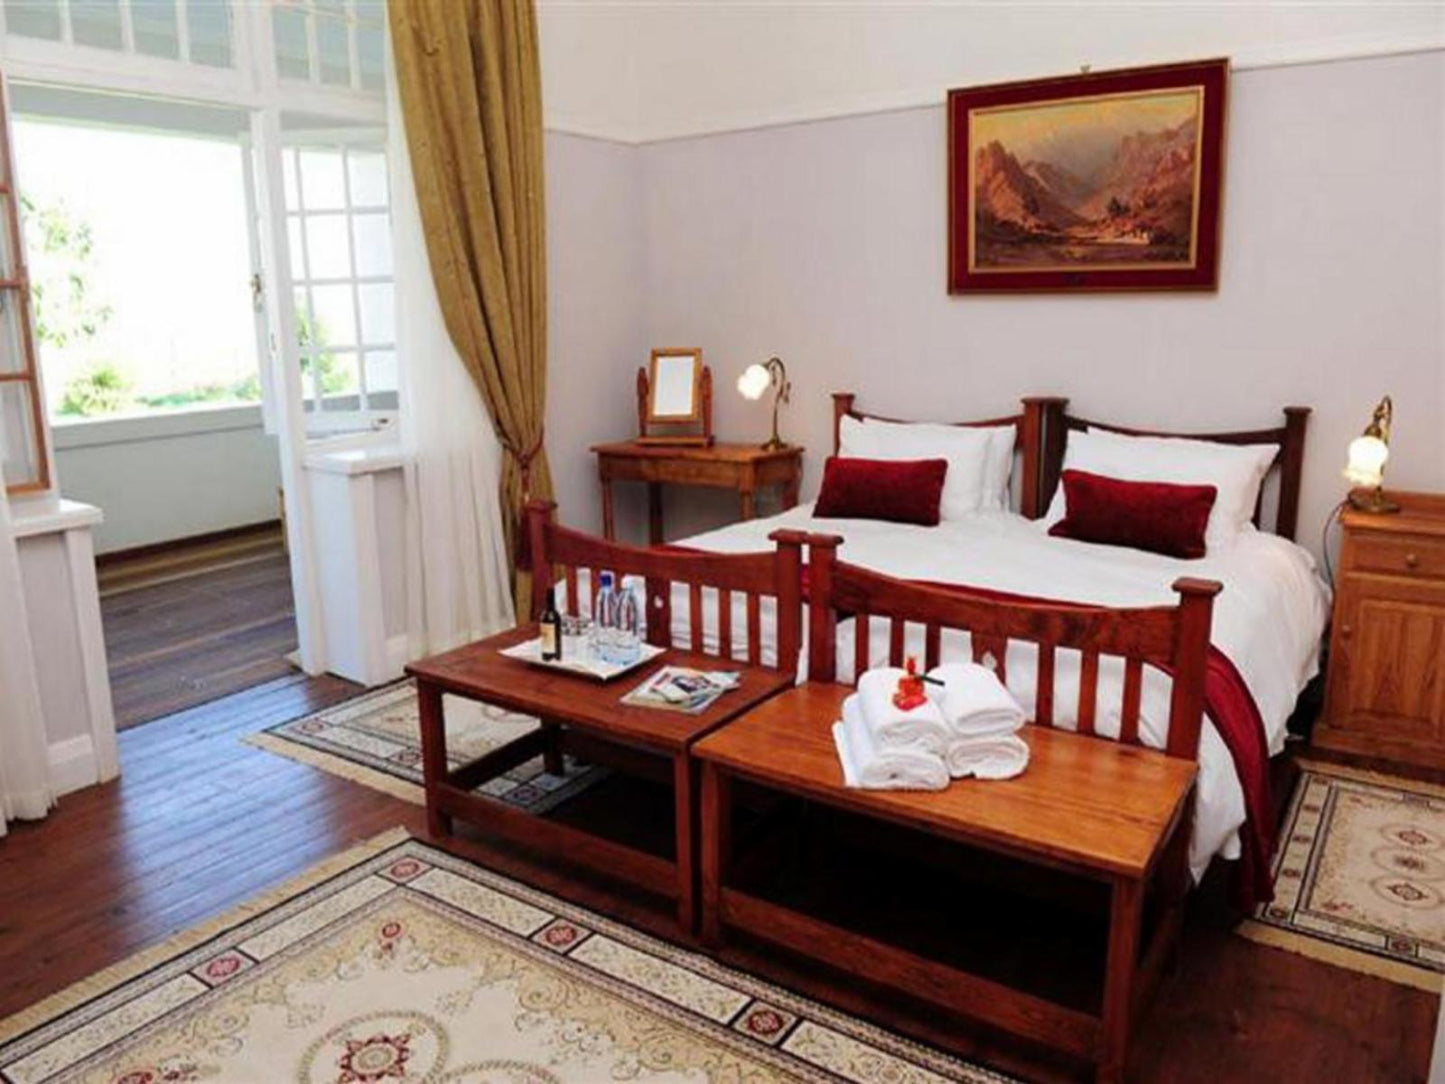 Standard Luxury Room 2 @ Excelsior Manor Guesthouse